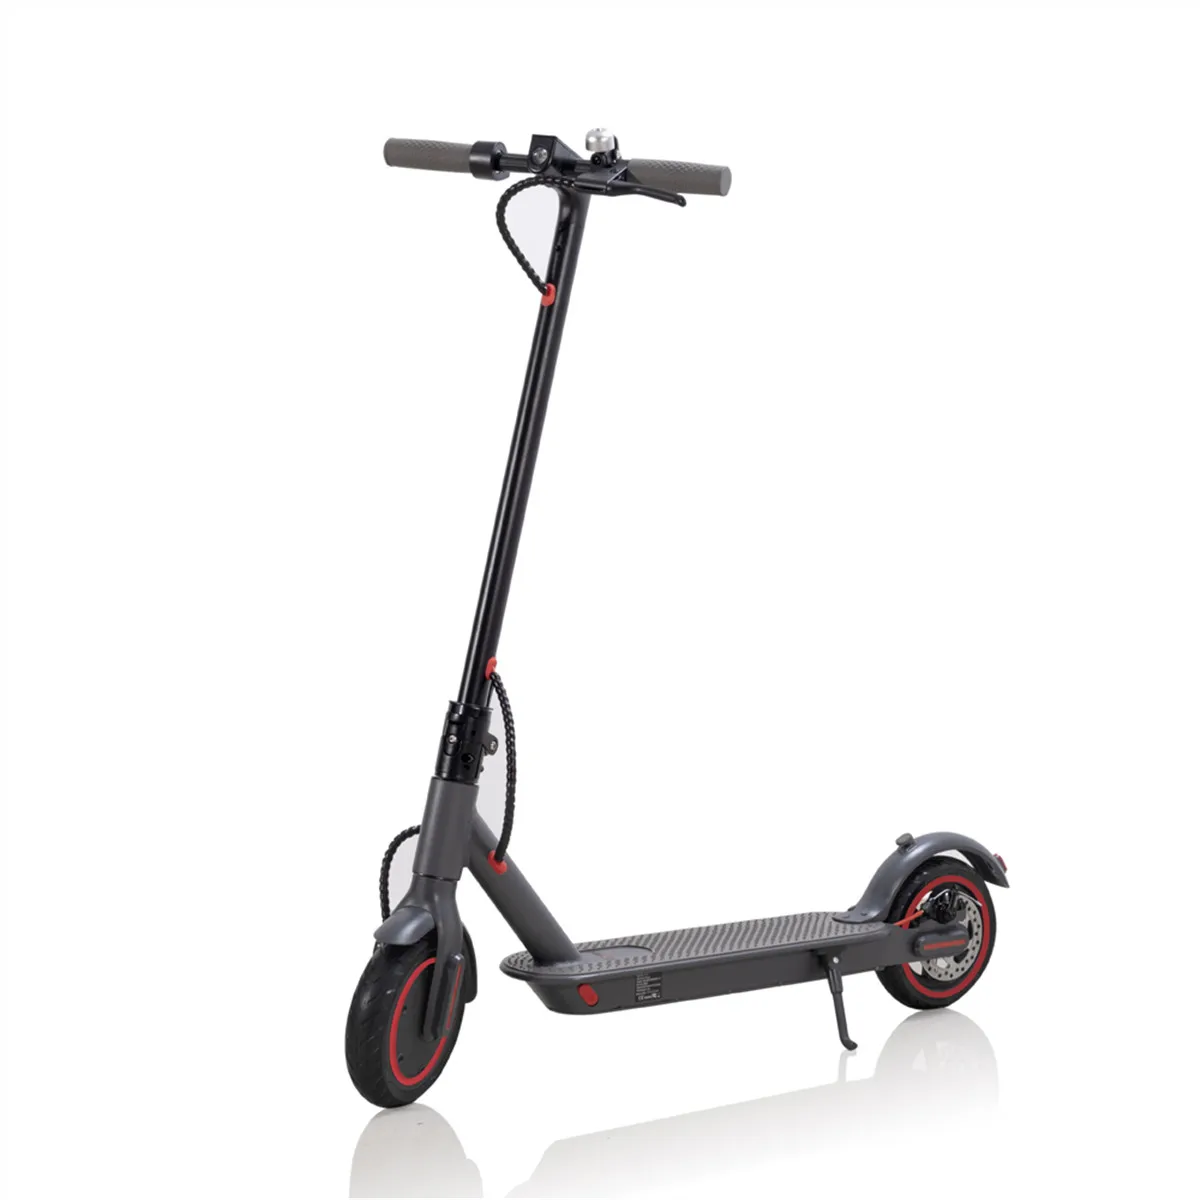 Cheap Factory Price Bike 500w Scooter 1000 Watt Gas Electric Scooters For Adults Street Legal